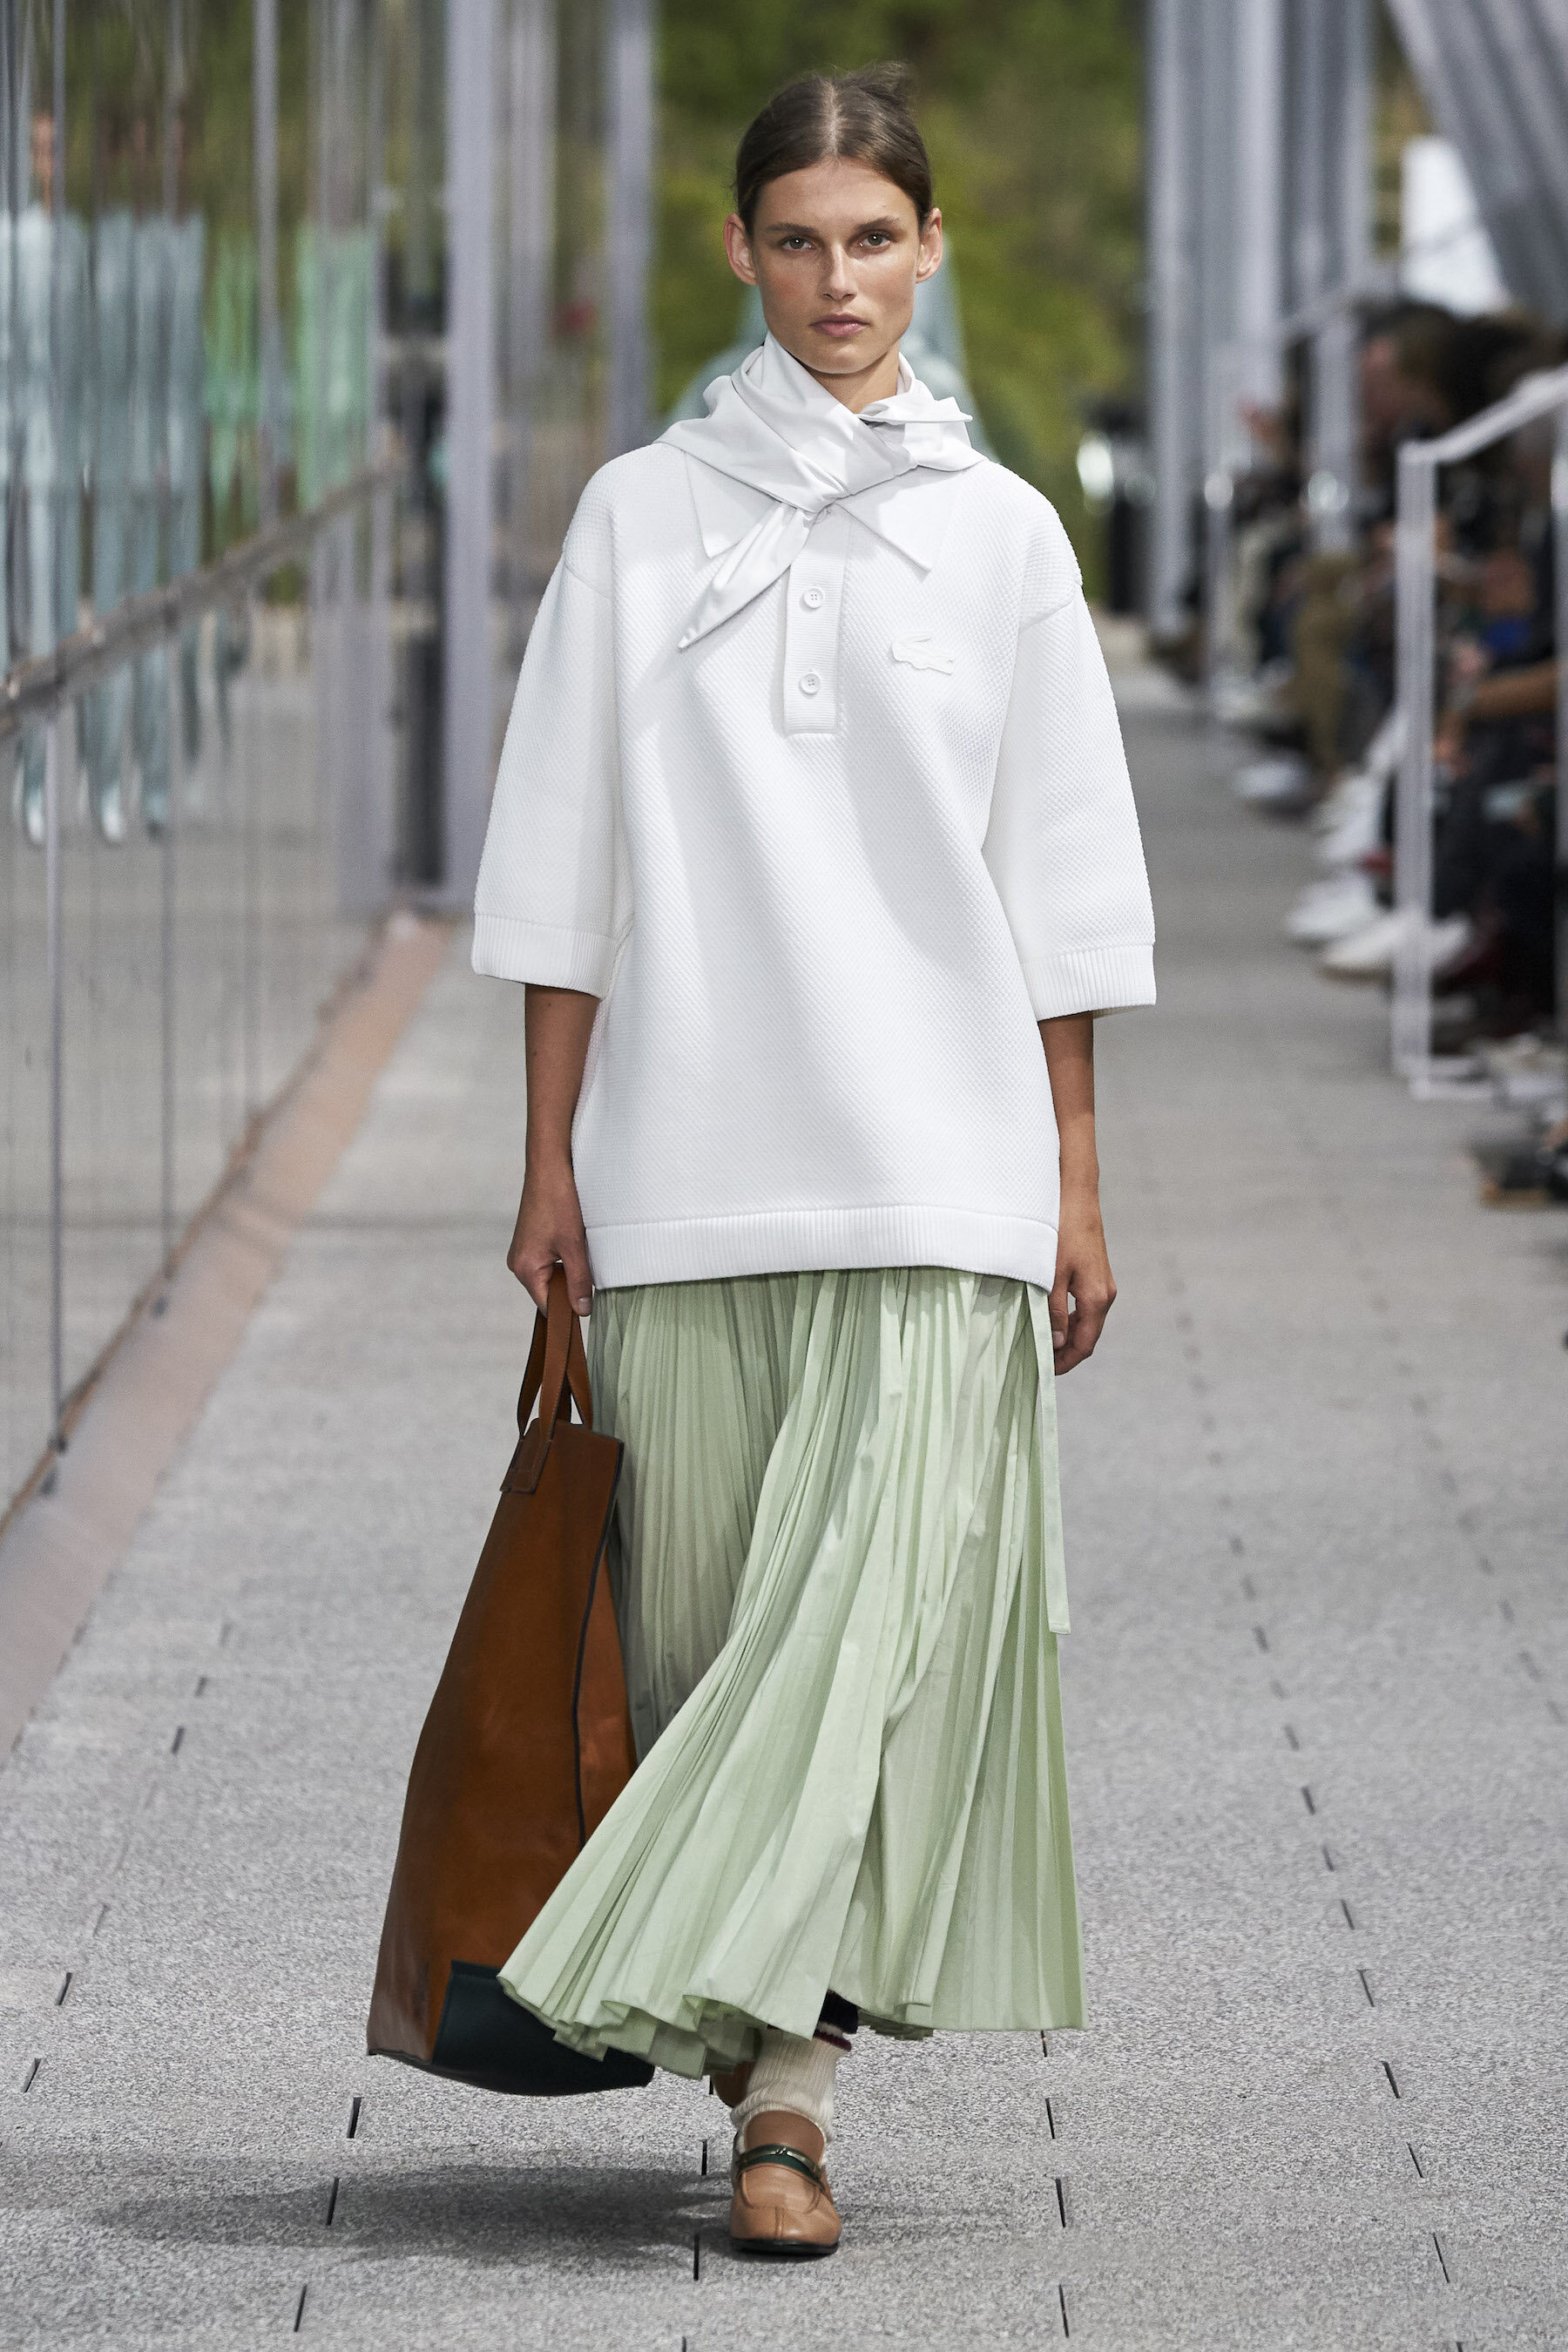 Lacoste SS20_LOOK 35 by Alessandro Lucioni  Imaxtree.com.jpg